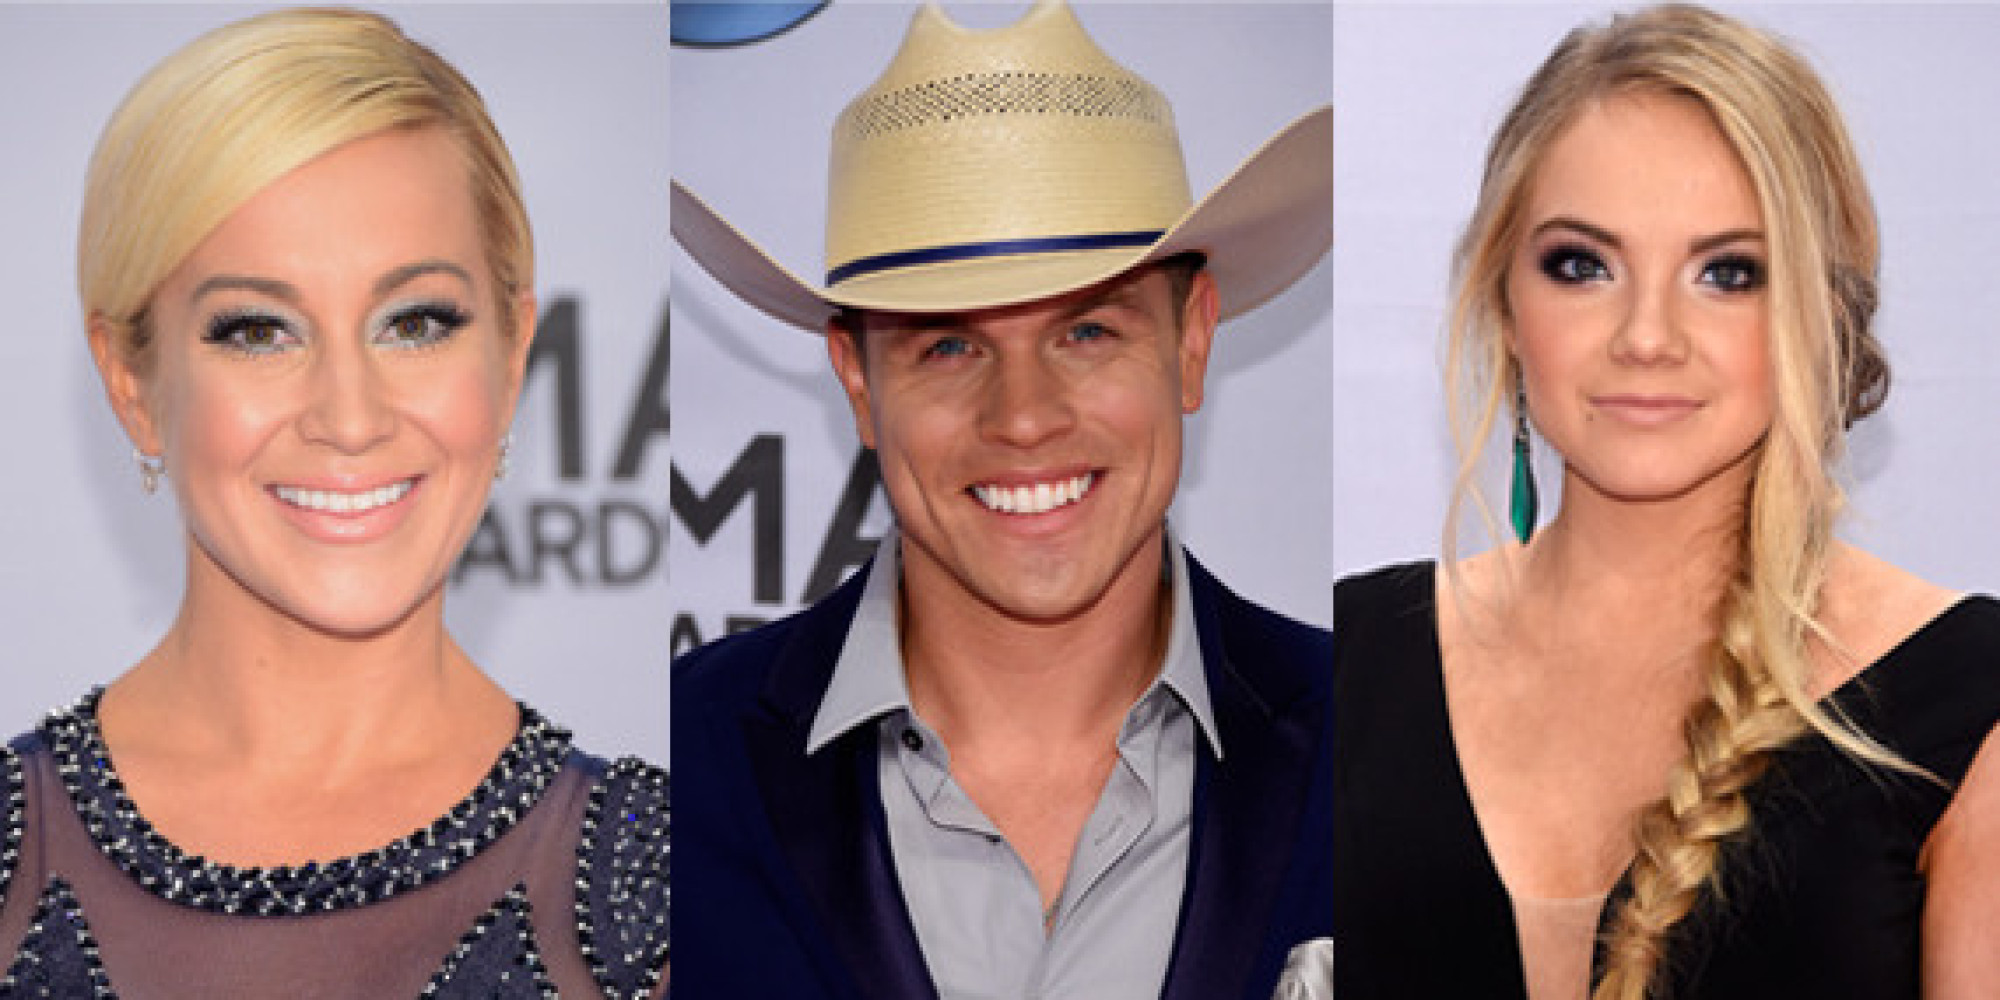 CMA Awards 2014 Red Carpet See All The Fashion Hits & Misses (PHOTOS